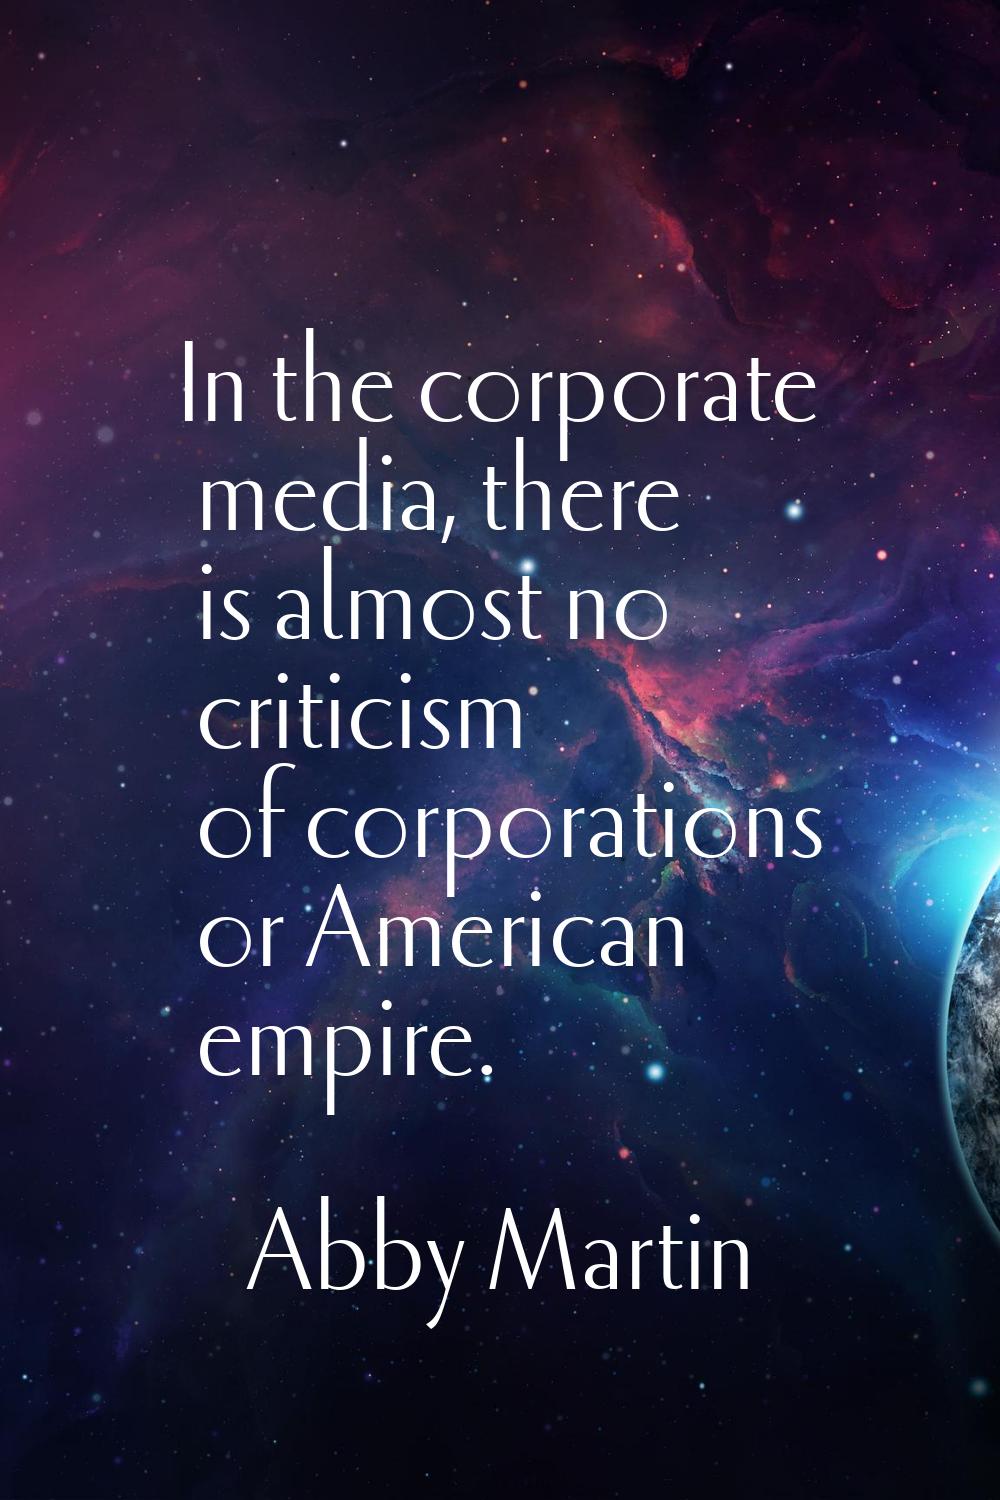 In the corporate media, there is almost no criticism of corporations or American empire.